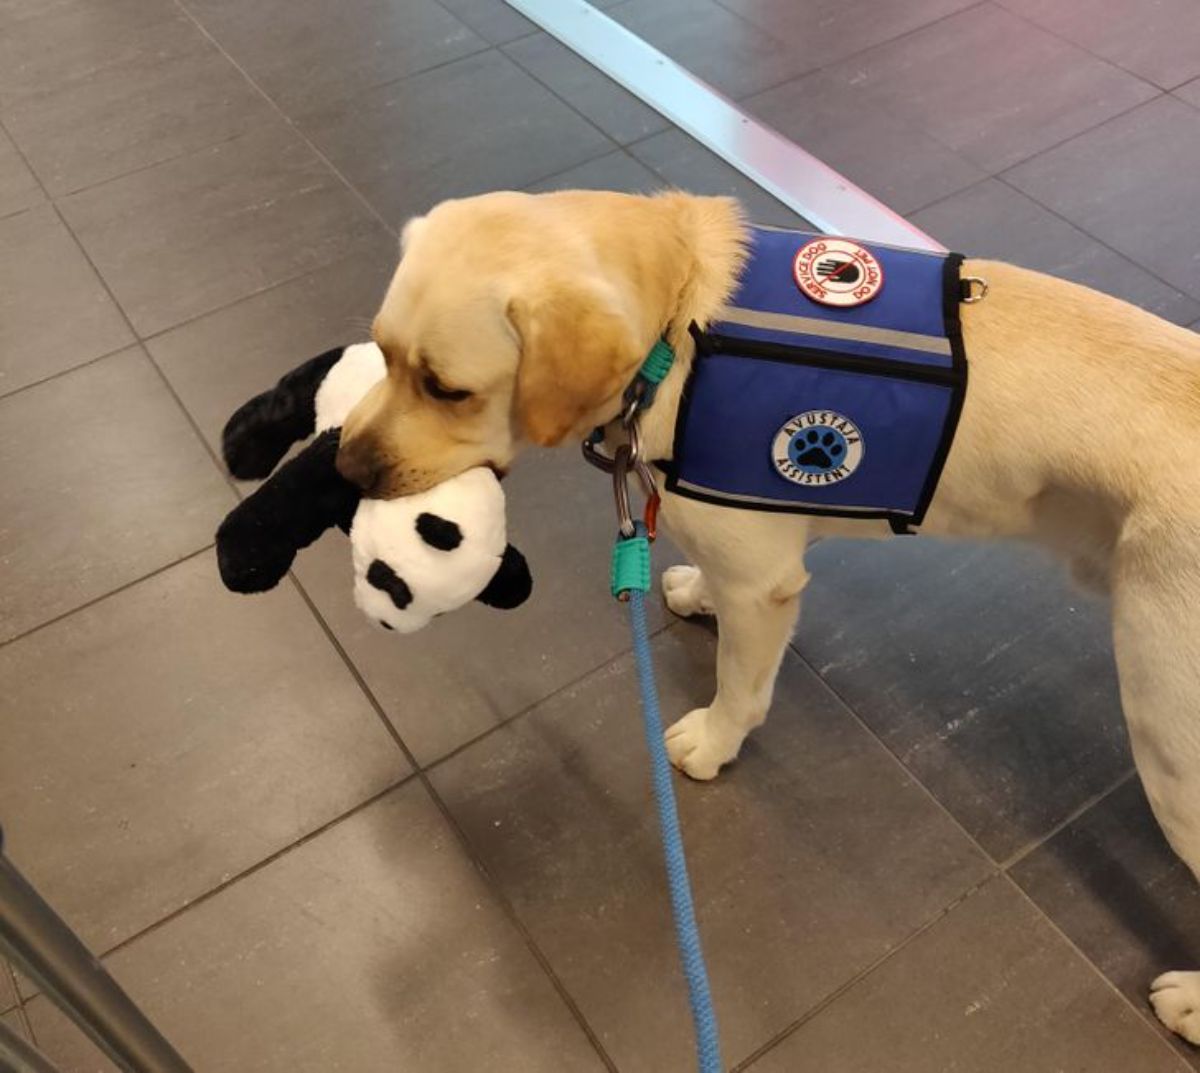 a golden retriever in a blue vest is holding a stuffed panda toy in its mouth